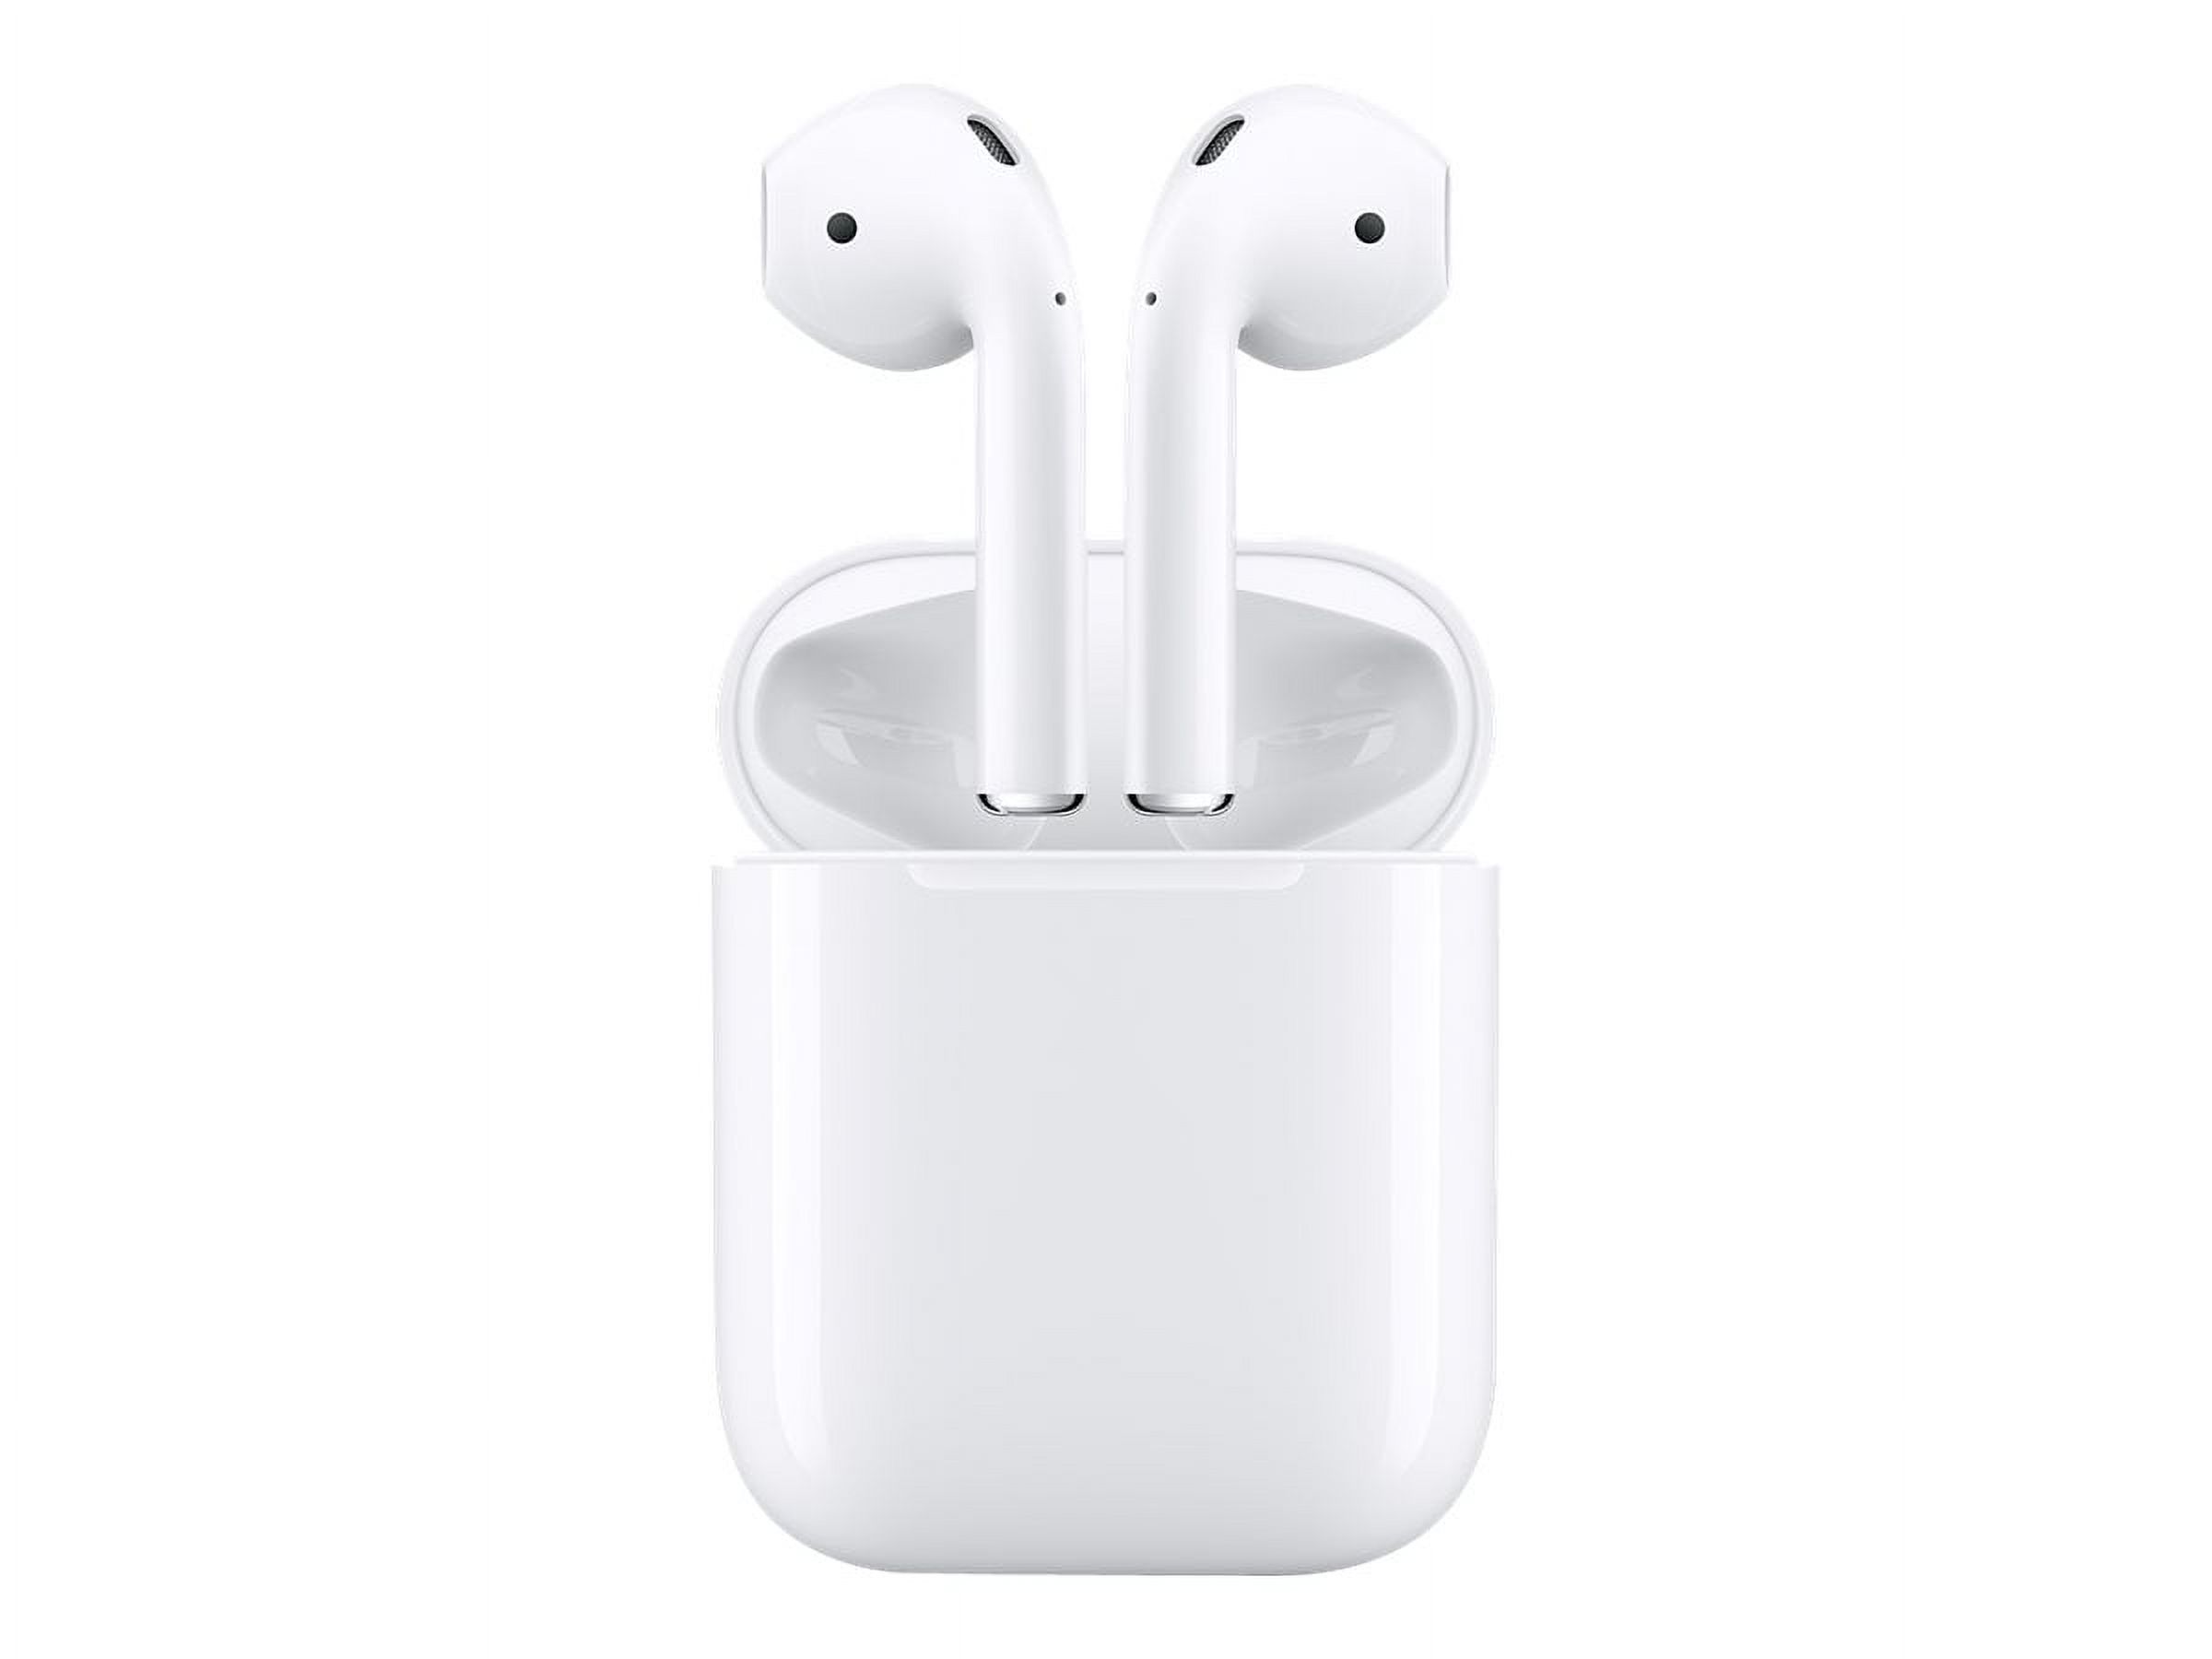 Restored Apple AirPods Bluetooth True Wireless Earbuds with Charging Case, White, VIPRB-MMEF2AM/A (Refurbished) - image 1 of 3